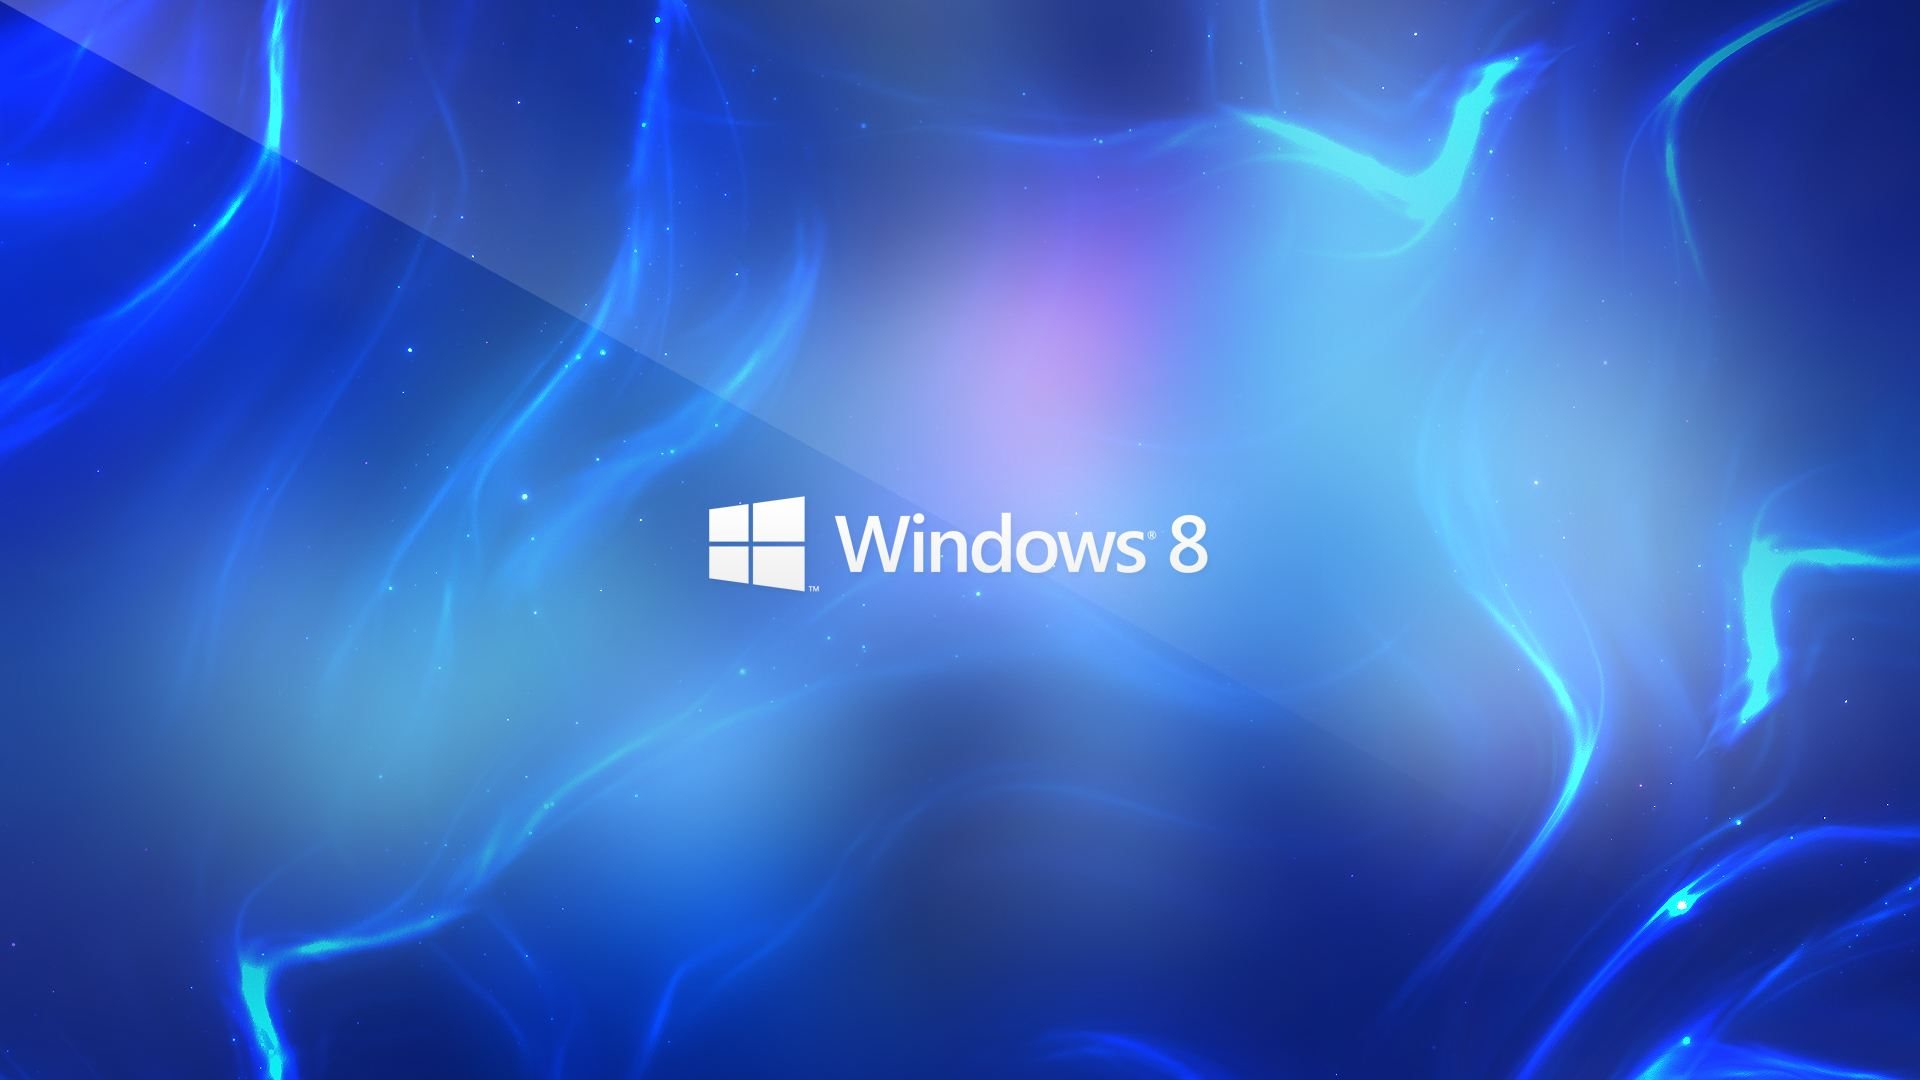 166 Windows 8 HD Wallpapers Backgrounds - Wallpaper Abyss -